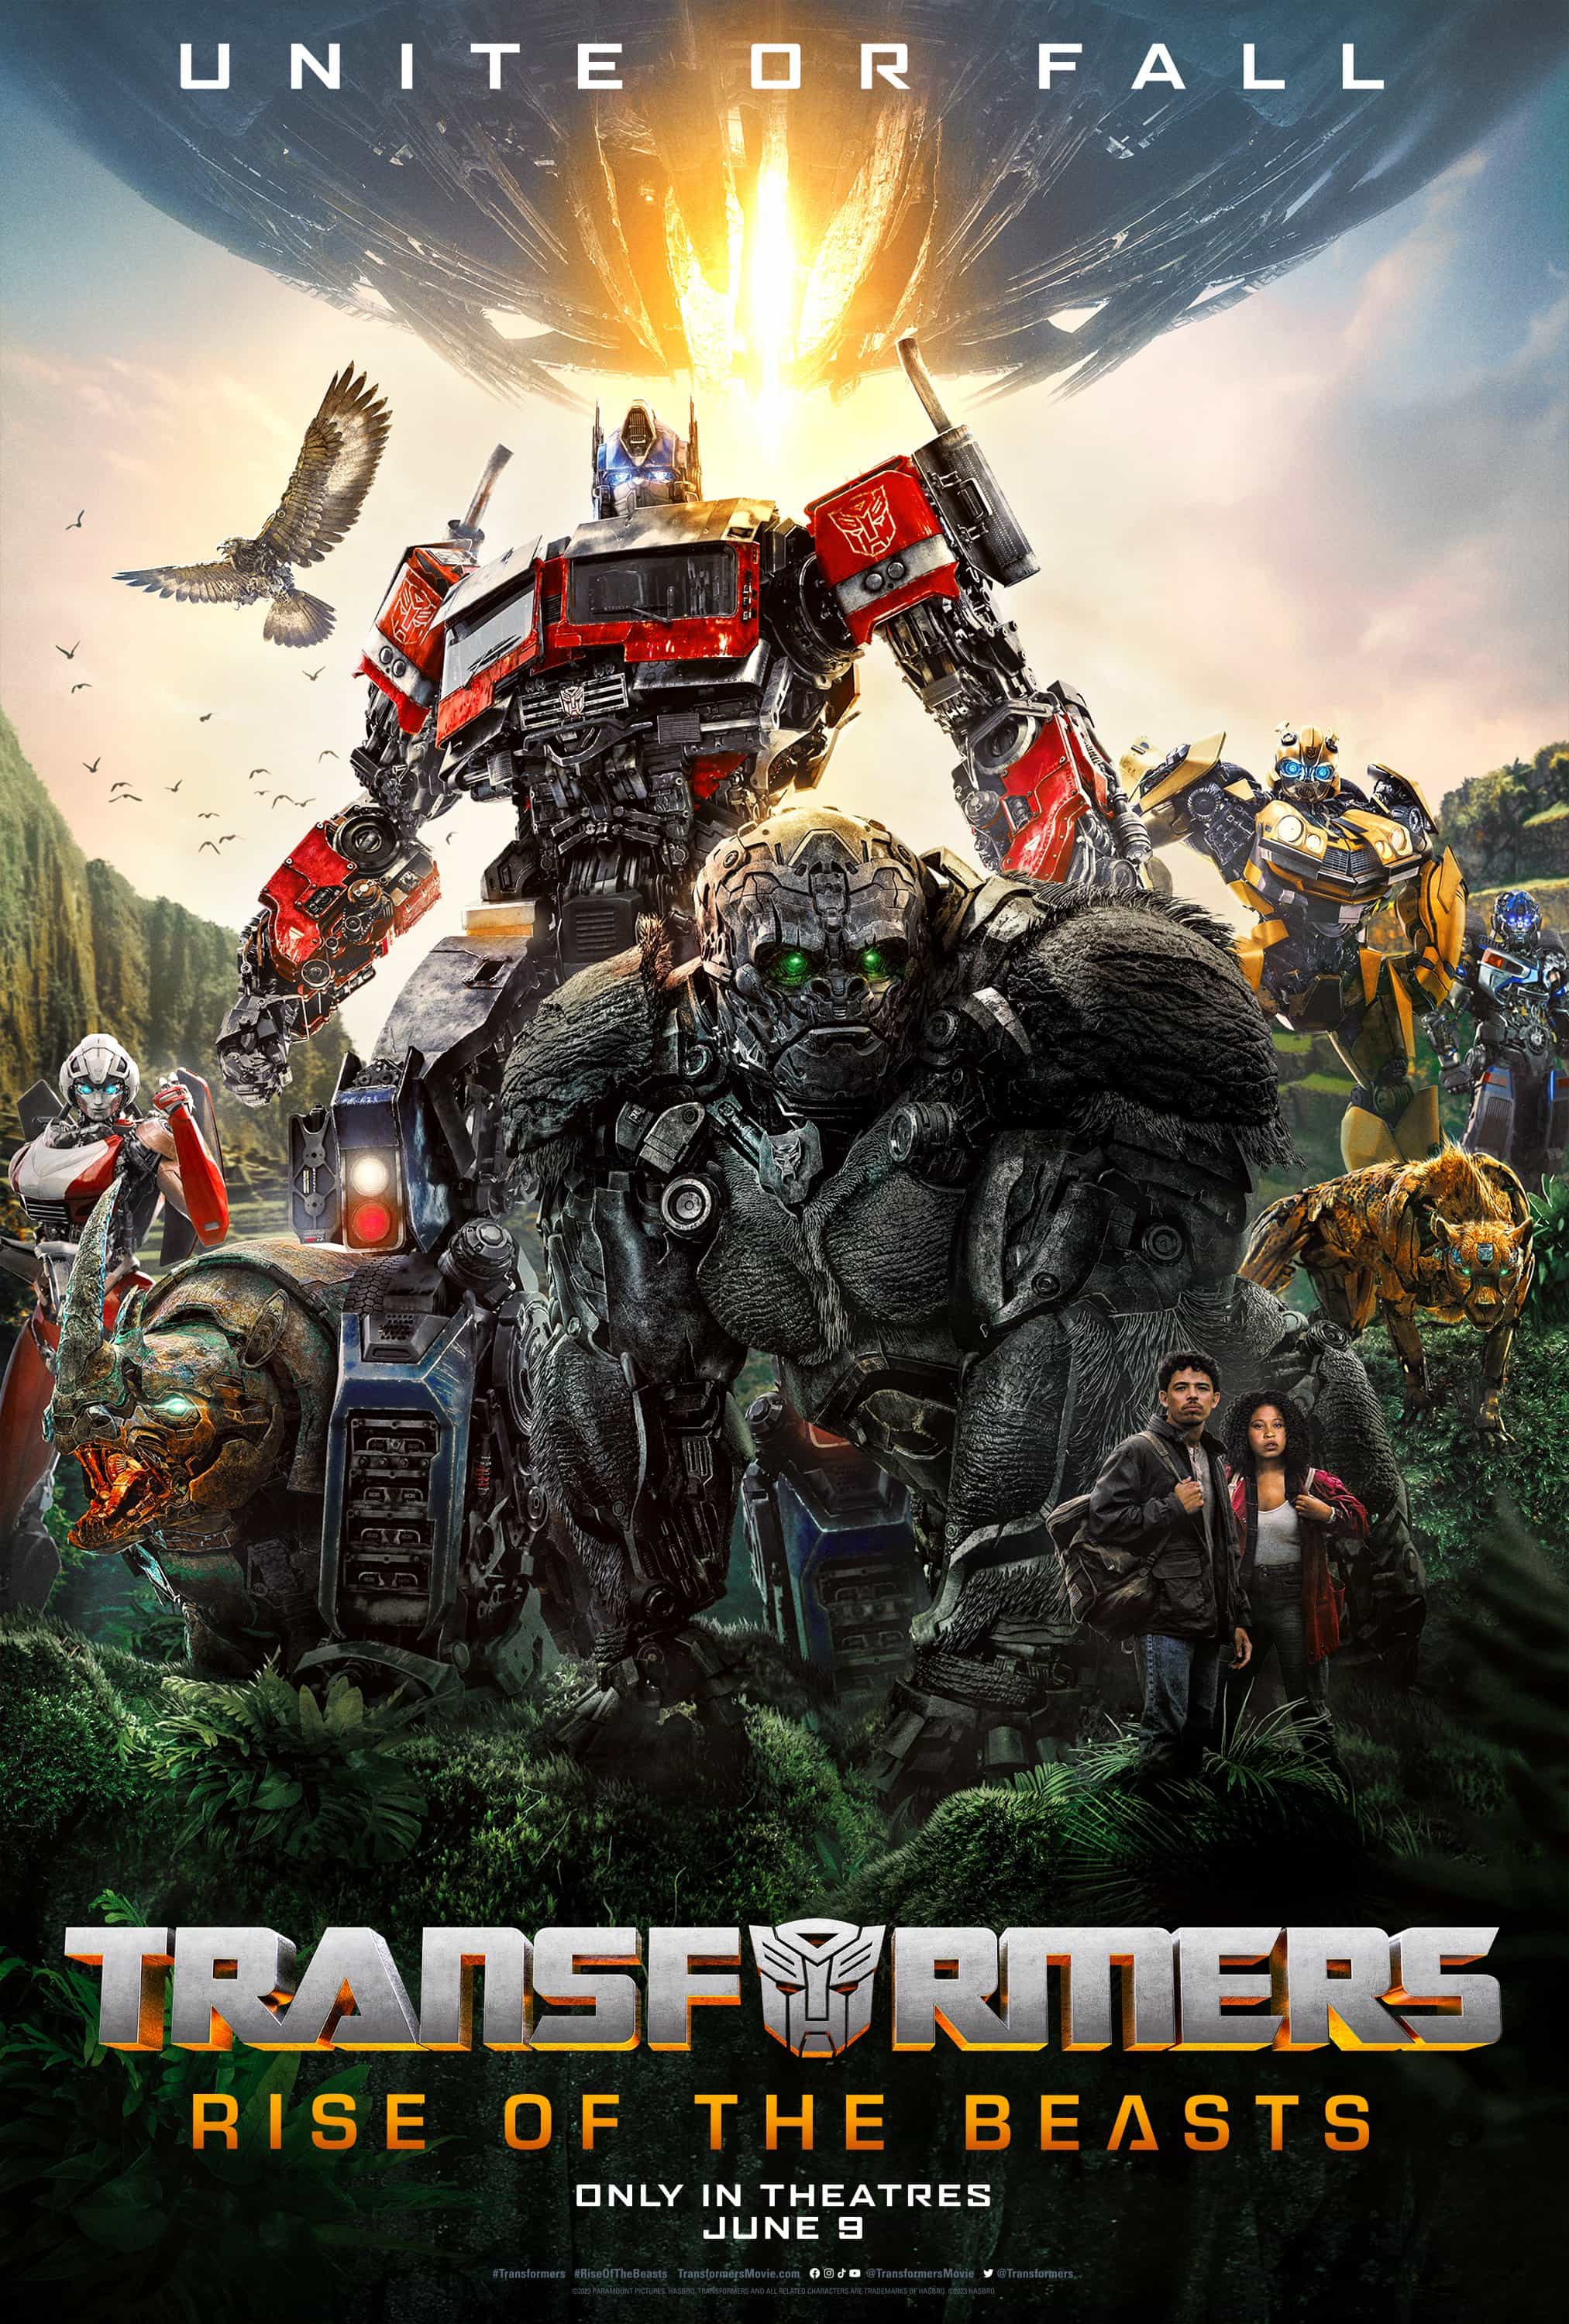 US Box Office Weekend Report 9th - 11th June 2023:  Transformers: Ride of the Beasts takes over at the top of the US box office with over $60 Million on its debut.